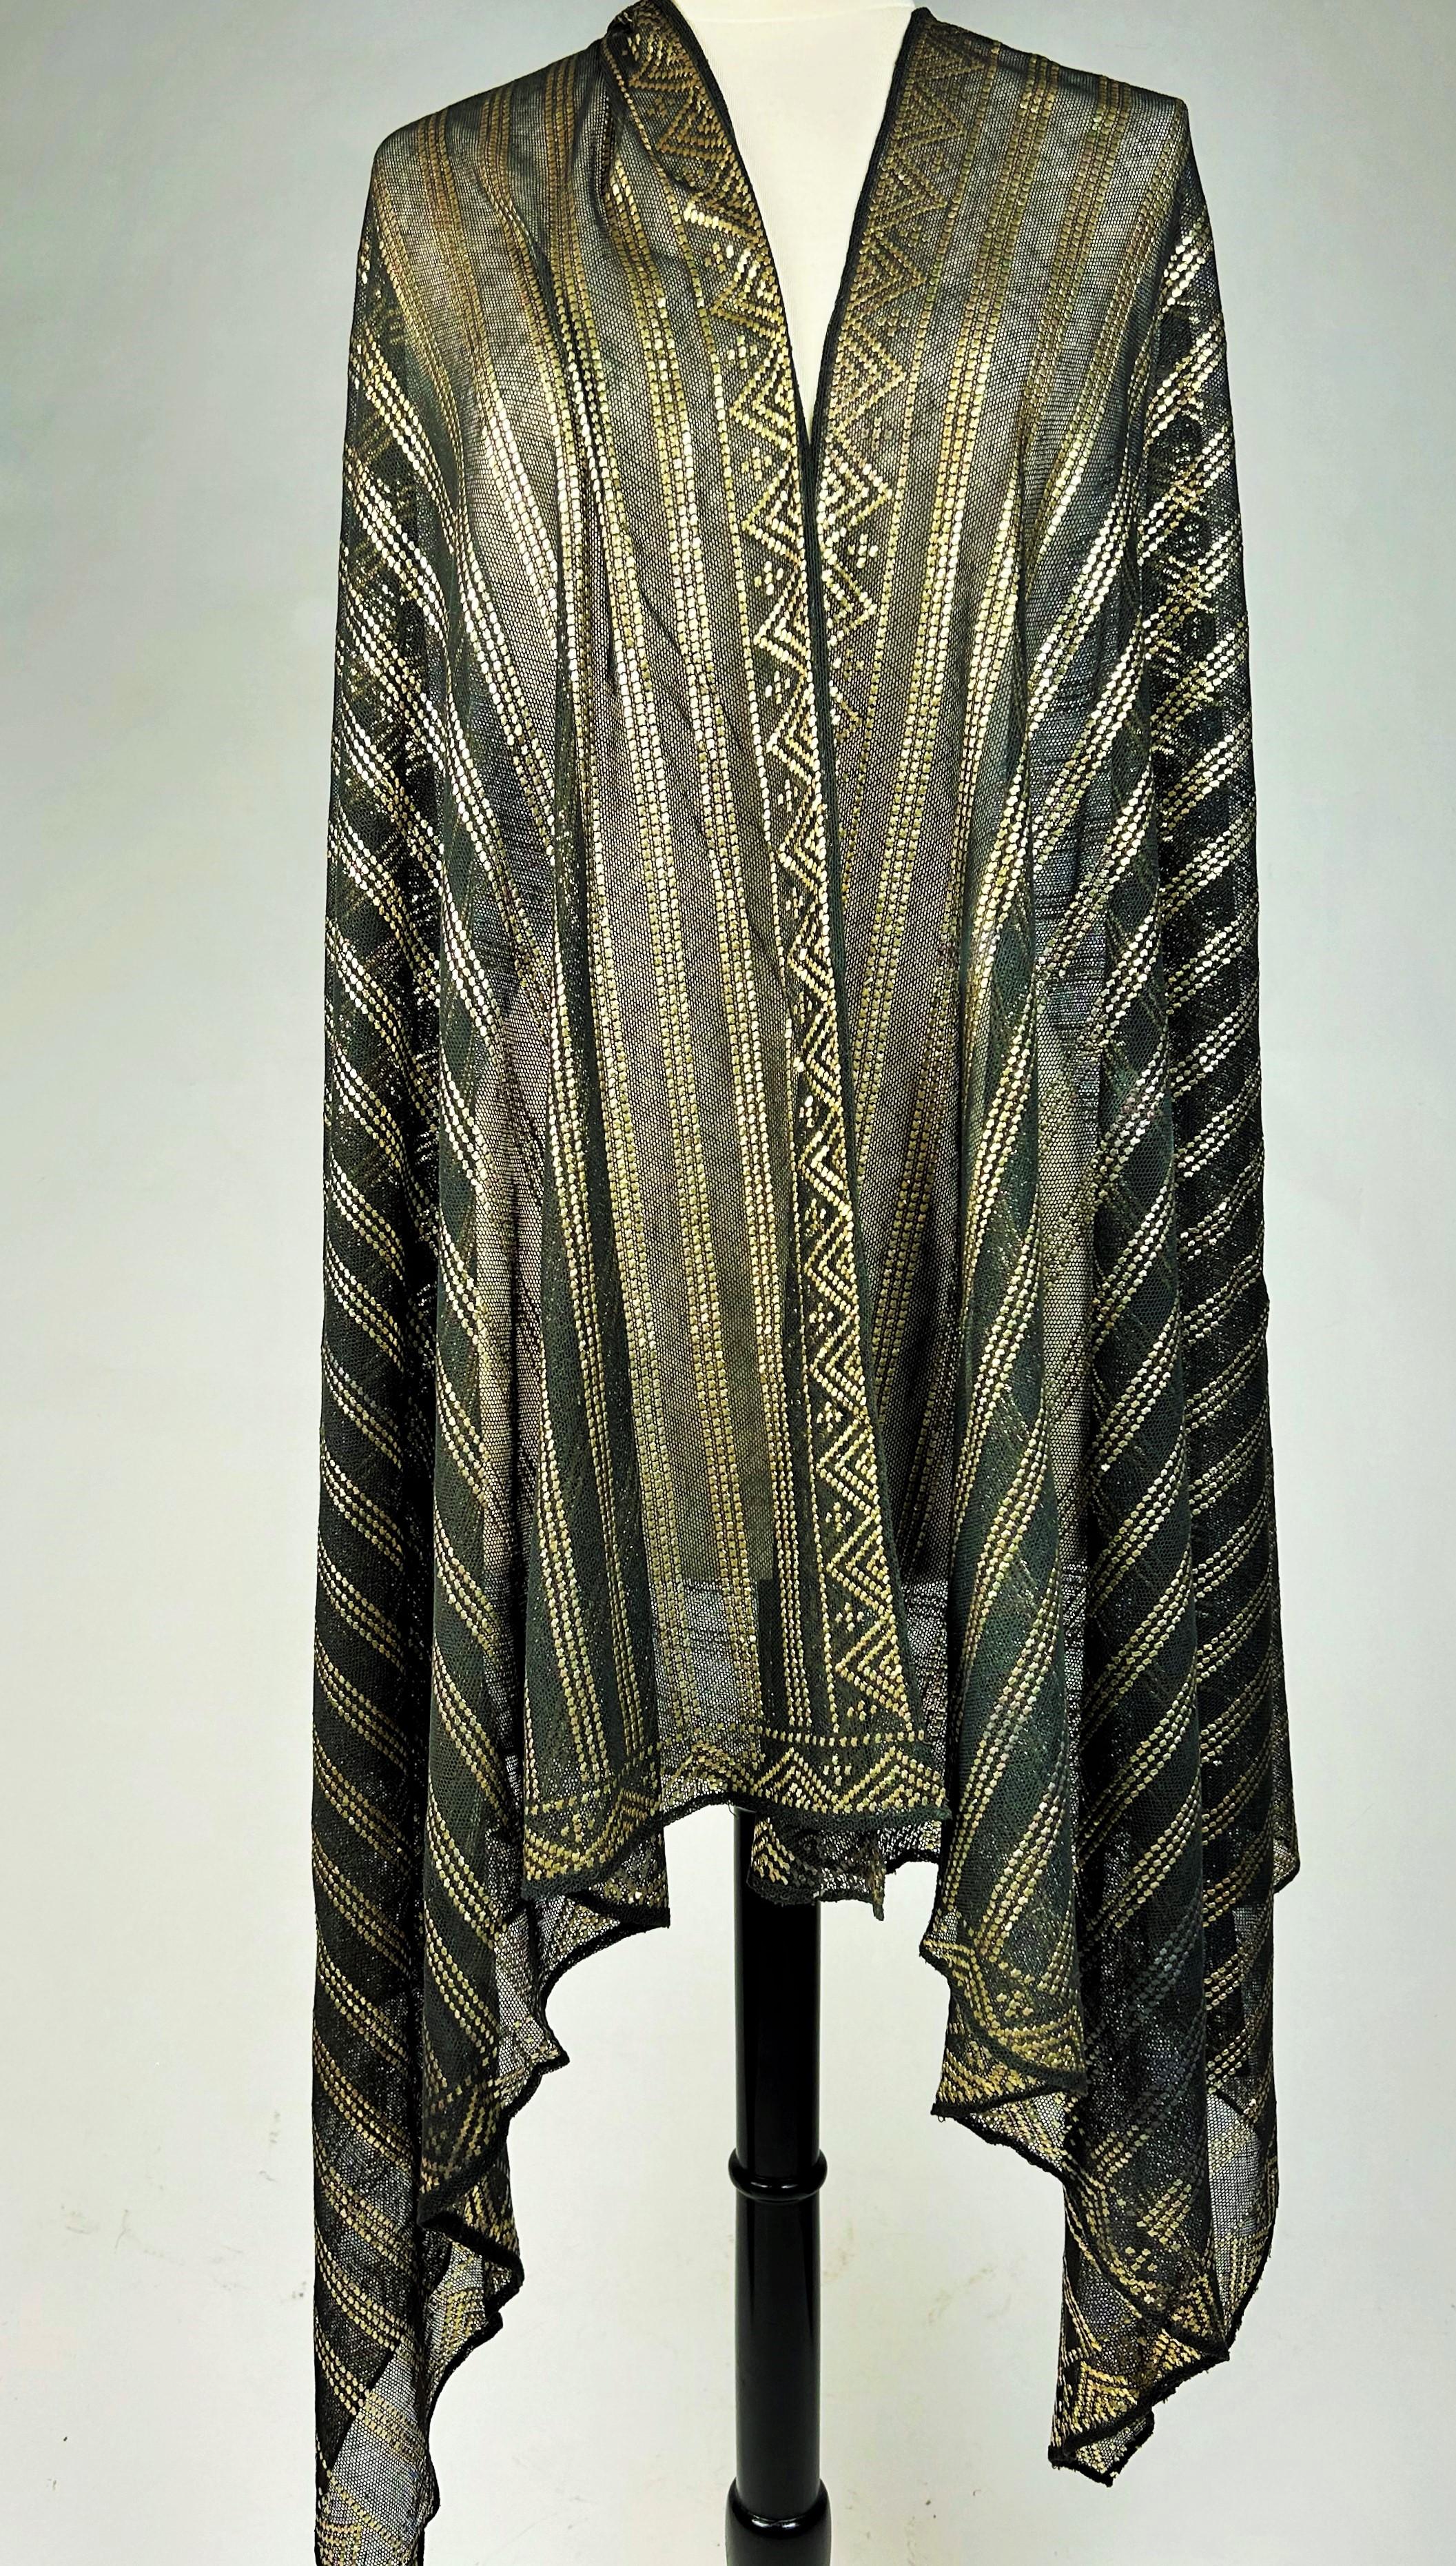 Circa 1930-1940

Egypt

An elegant black and gold shawl or stole from the Art Deco period, known as the Assuit Shawl, made in Egypt for Western fashion during the 1920s-1940s. The Egyptomania craze began in Europe after the discovery of